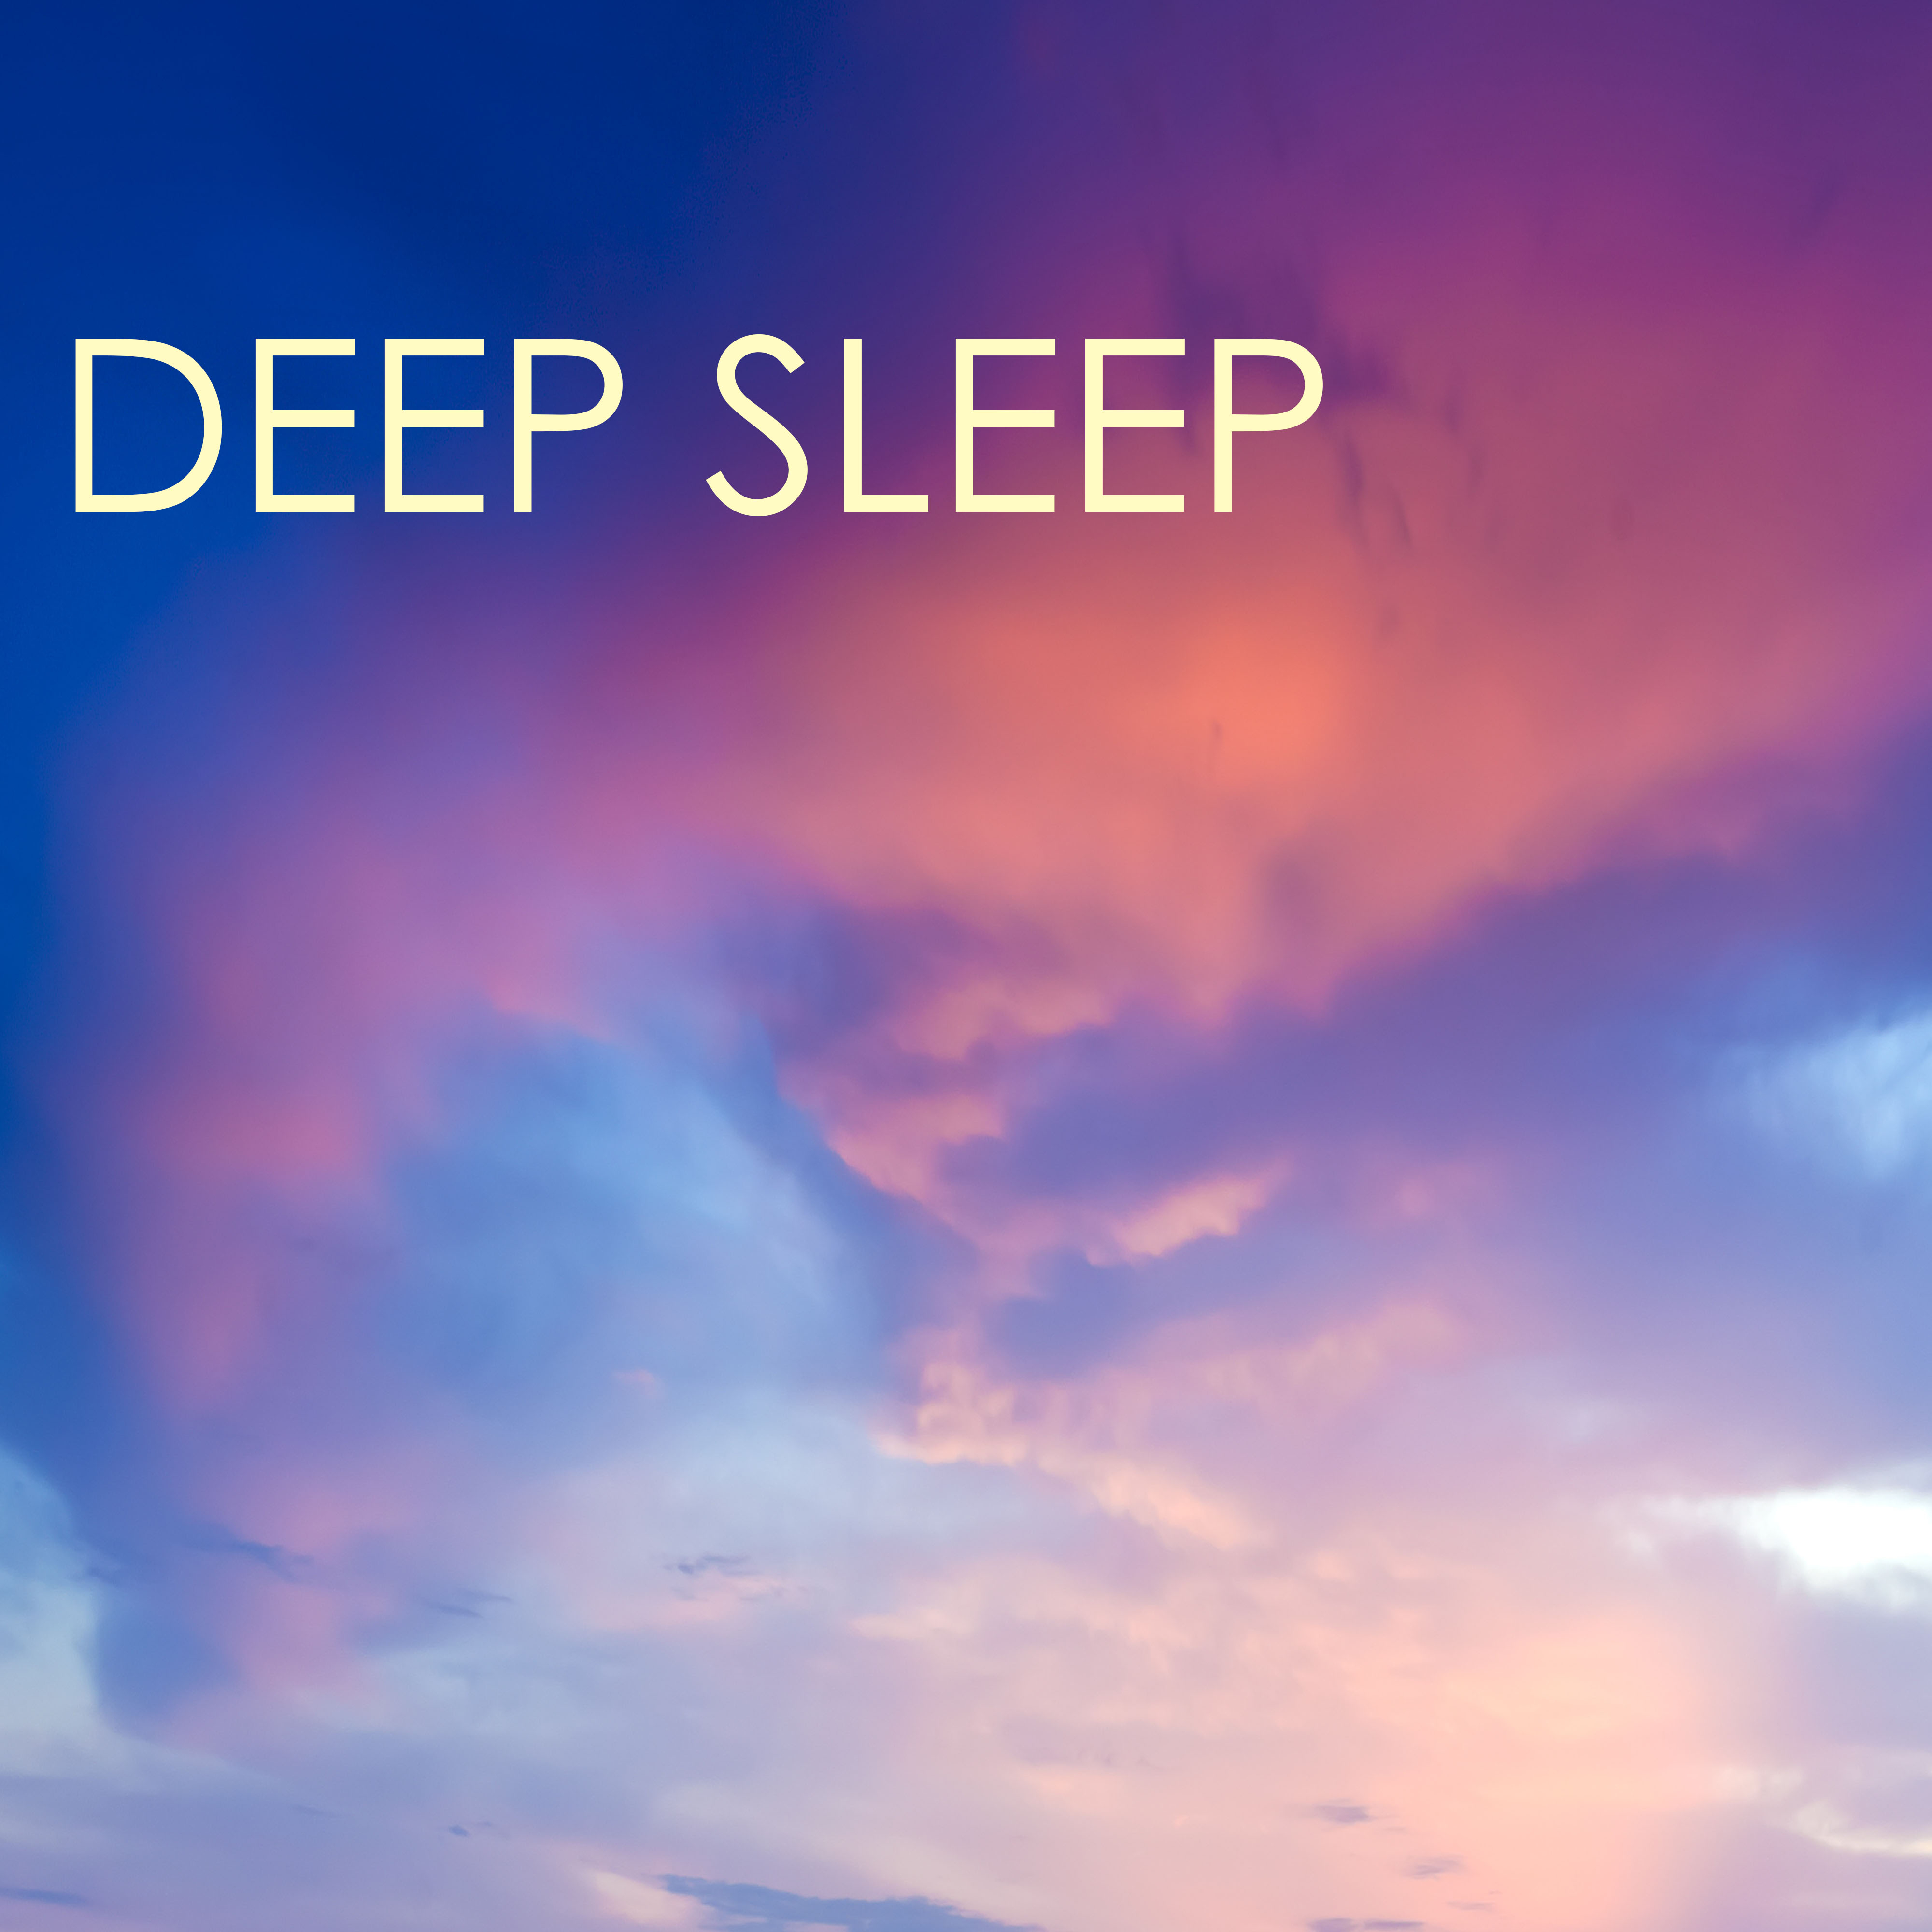 Deep Sleep - Relaxing Music Therapy, Slow Long Sleeping Songs for Healing, Massage, Yoga and Quietness, Sounds to Help You Relax Better at Night, New Age Meditation Lullabies for Wellness and Spirituality